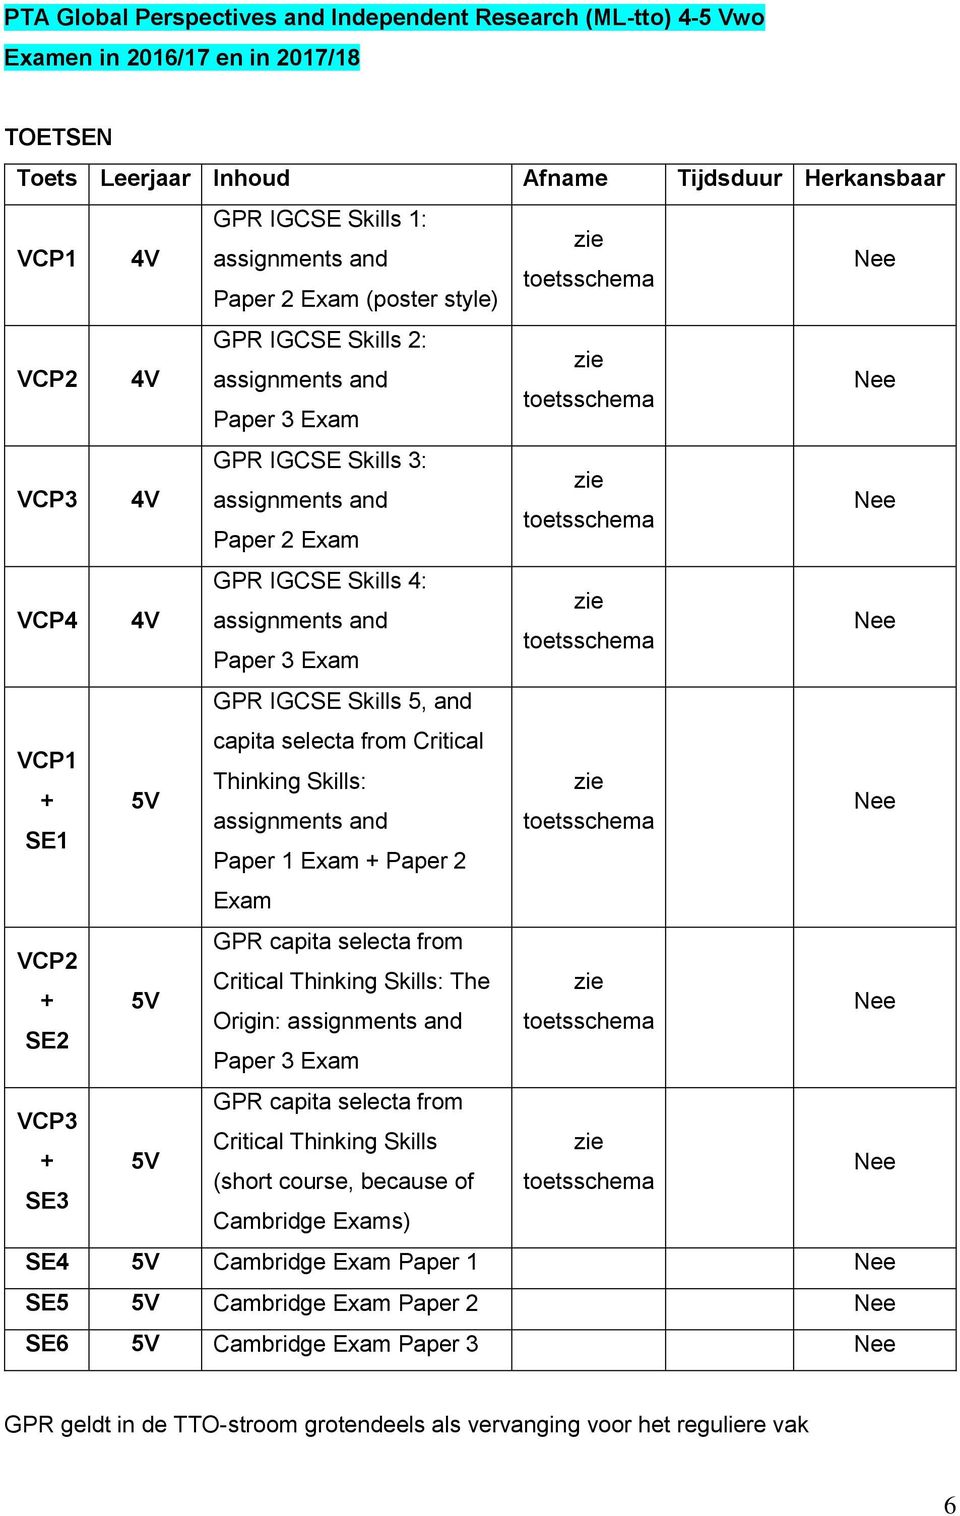 Exam GPR IGCSE Skills 5, and capita selecta from Critical VCP1 Thinking Skills: + 5V assignments and SE1 Paper 1 Exam + Paper 2 Exam GPR capita selecta from VCP2 Critical Thinking Skills: The + 5V